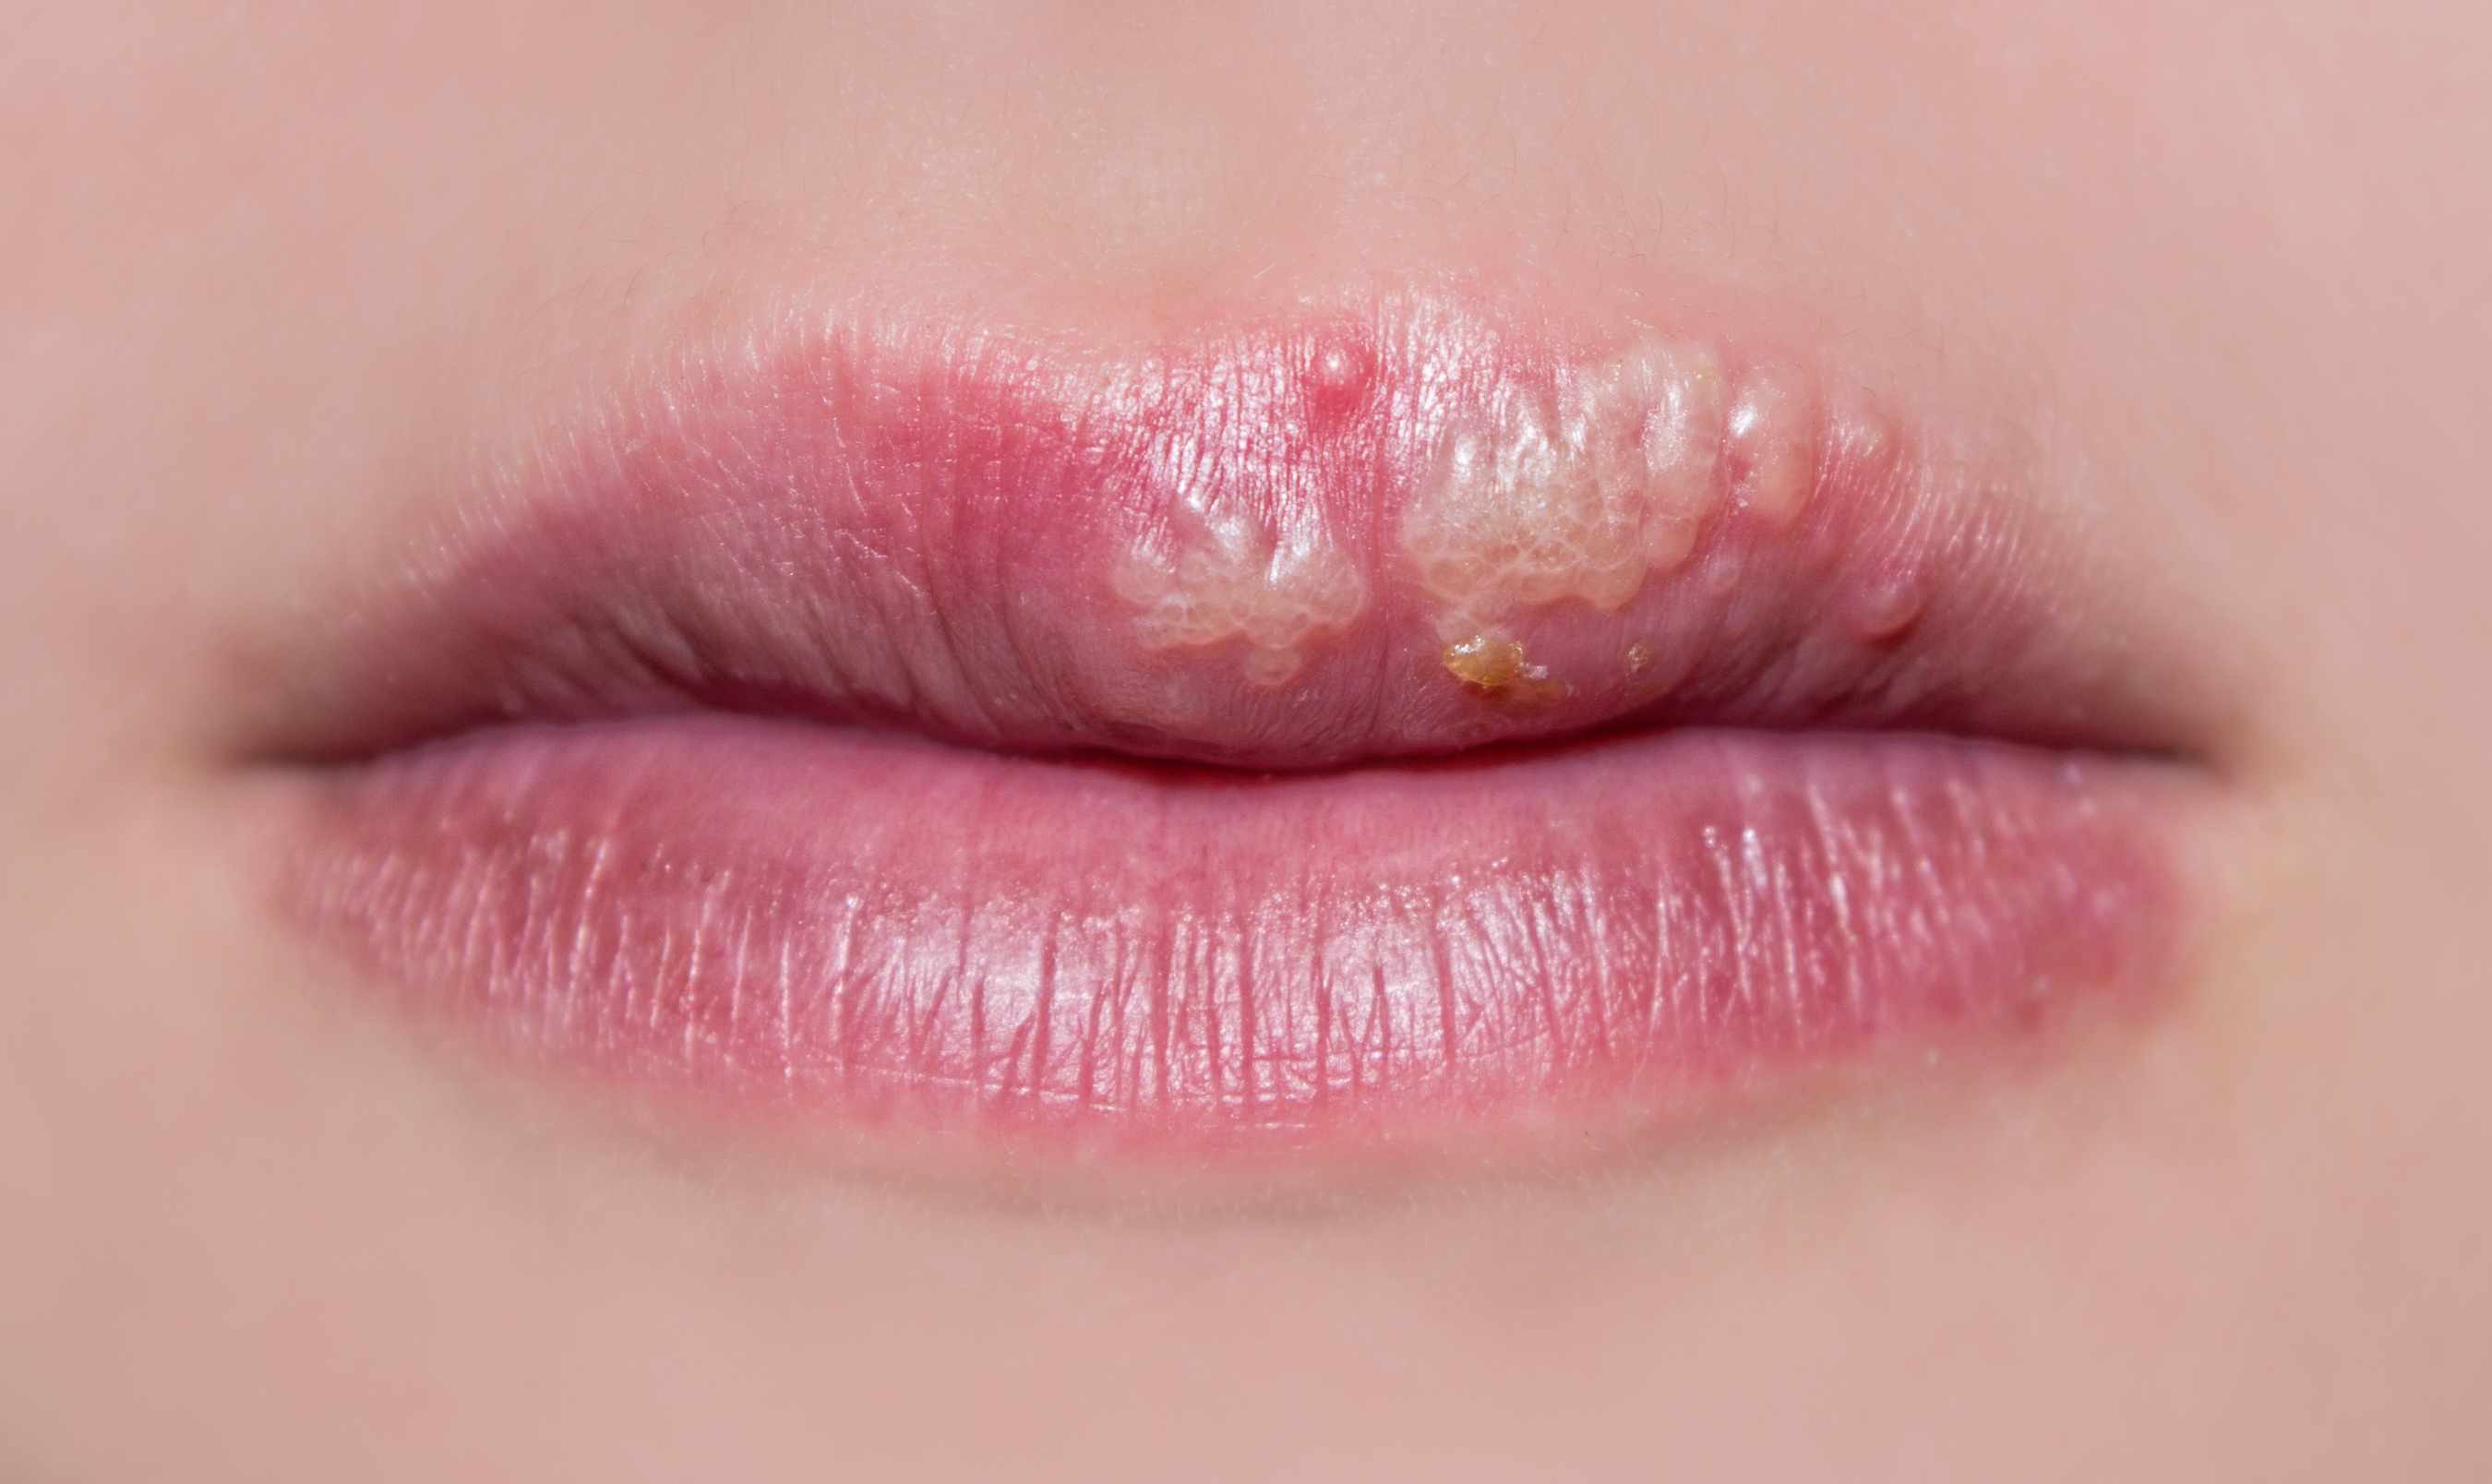 a close-up of a woman's lips, with cold sores